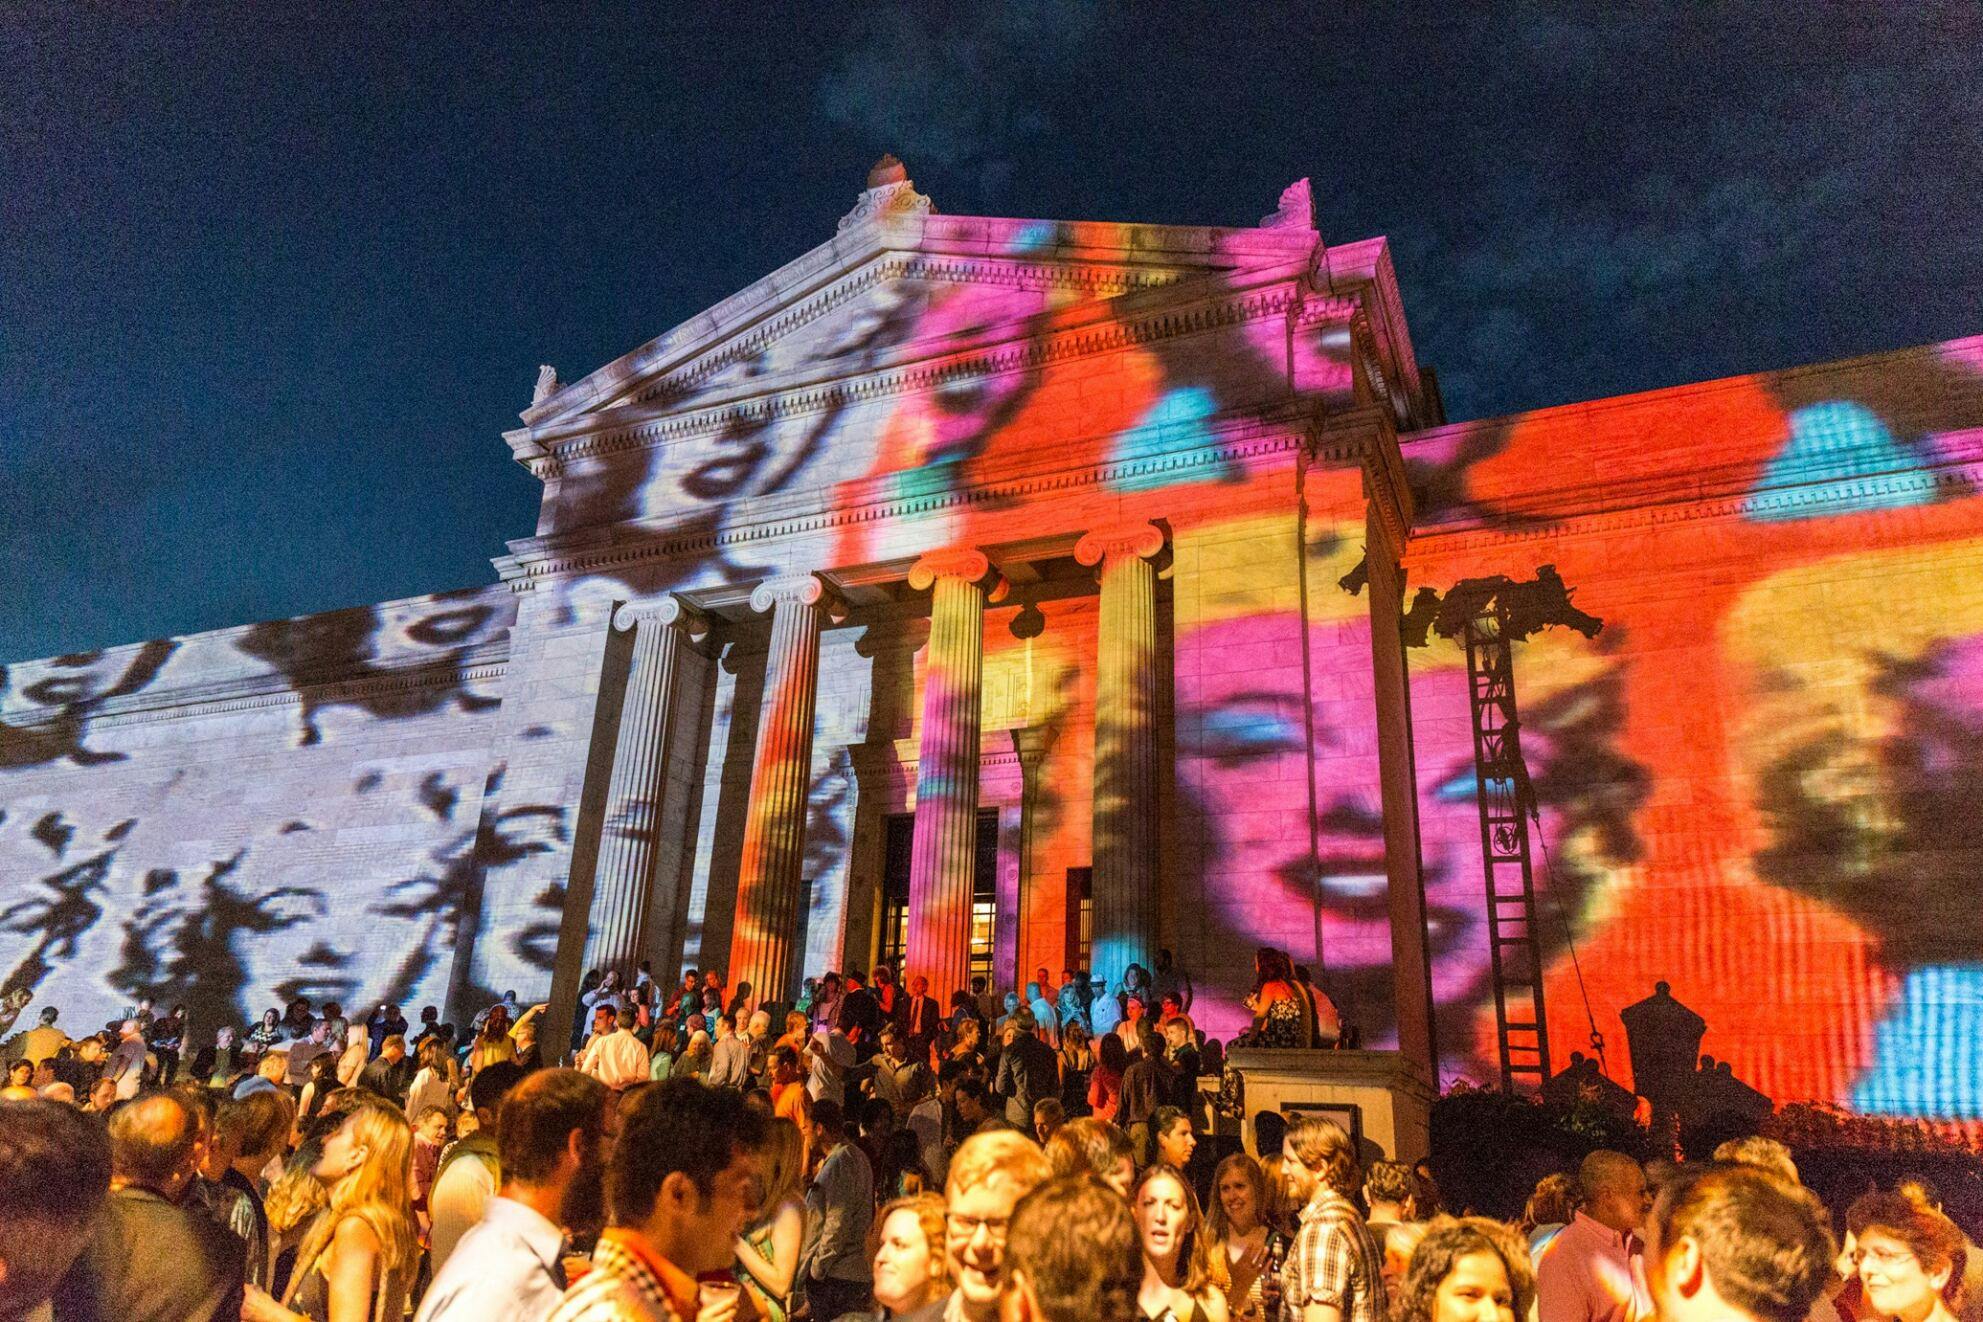 a crowd of people gathered outside the CMA in celebration, with art projected onto the building behind them